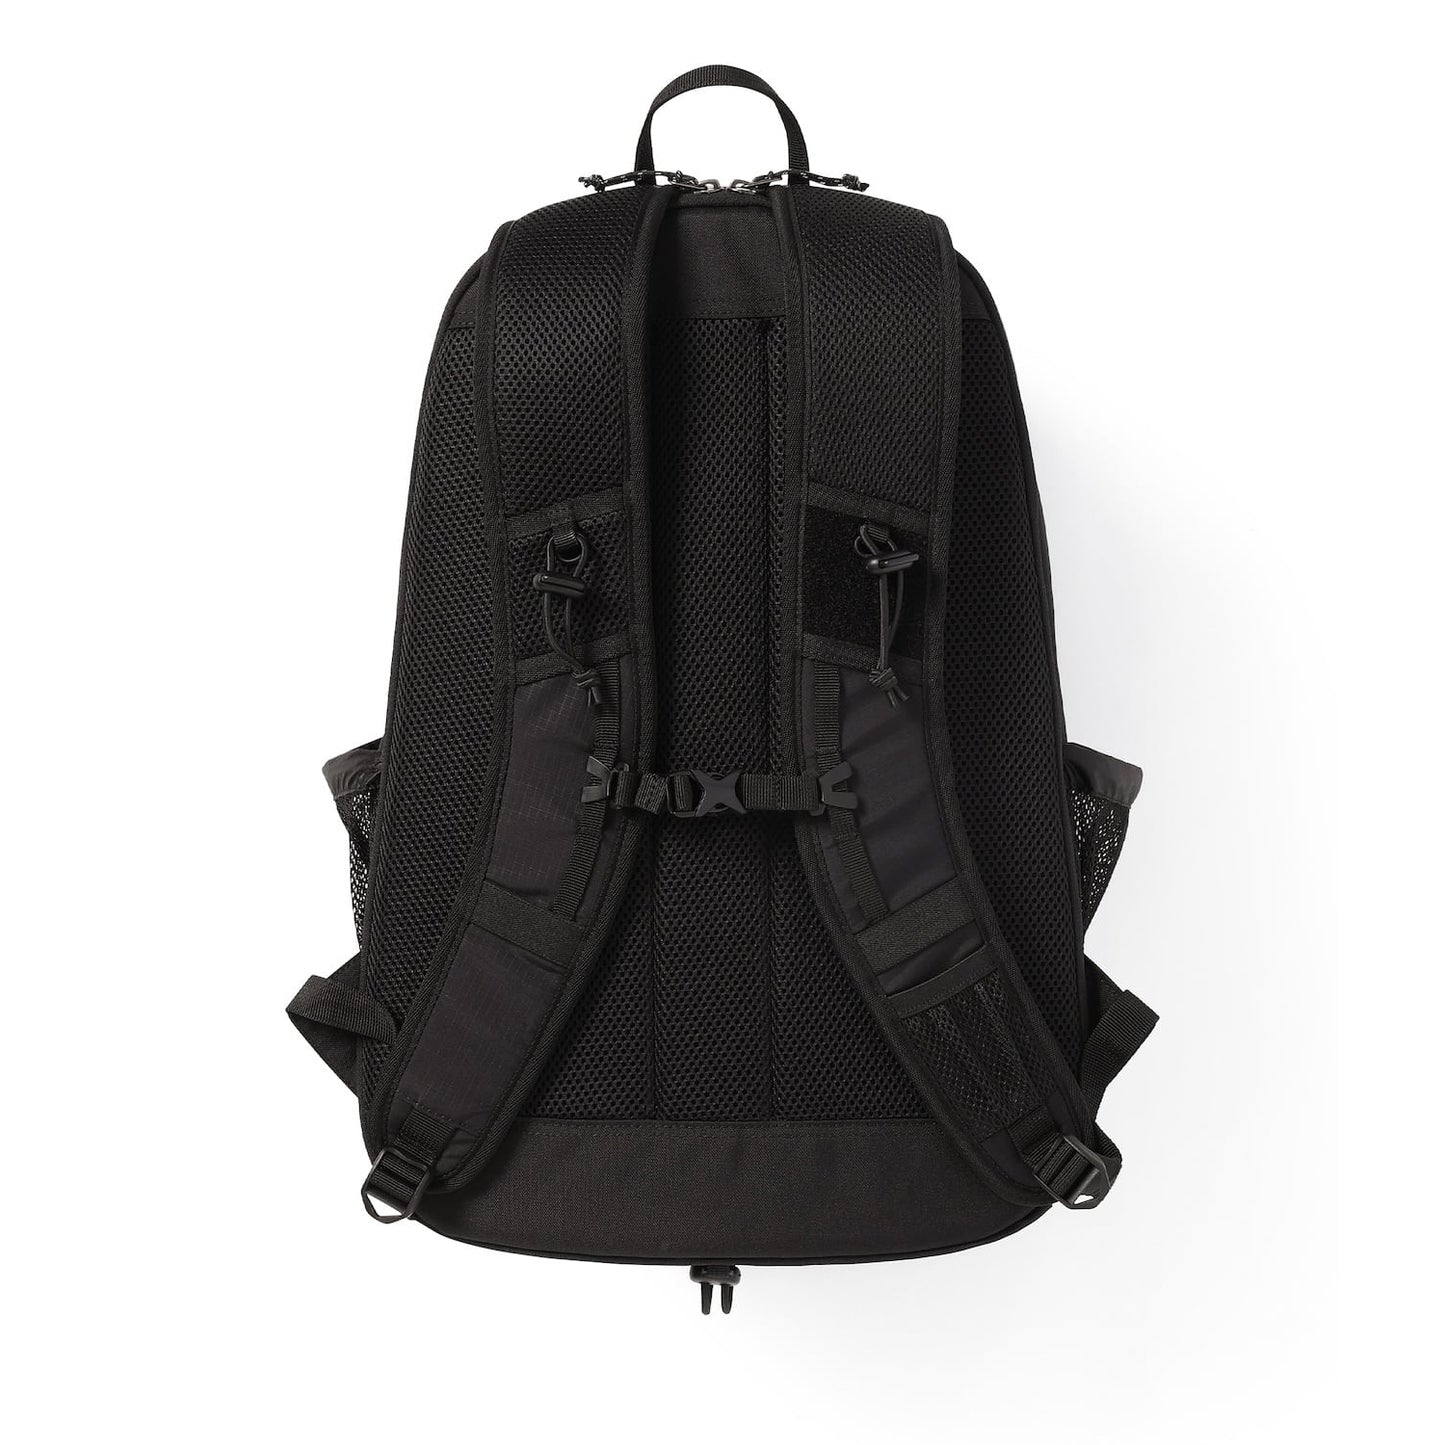 thisisneverthat SP Backpack 29